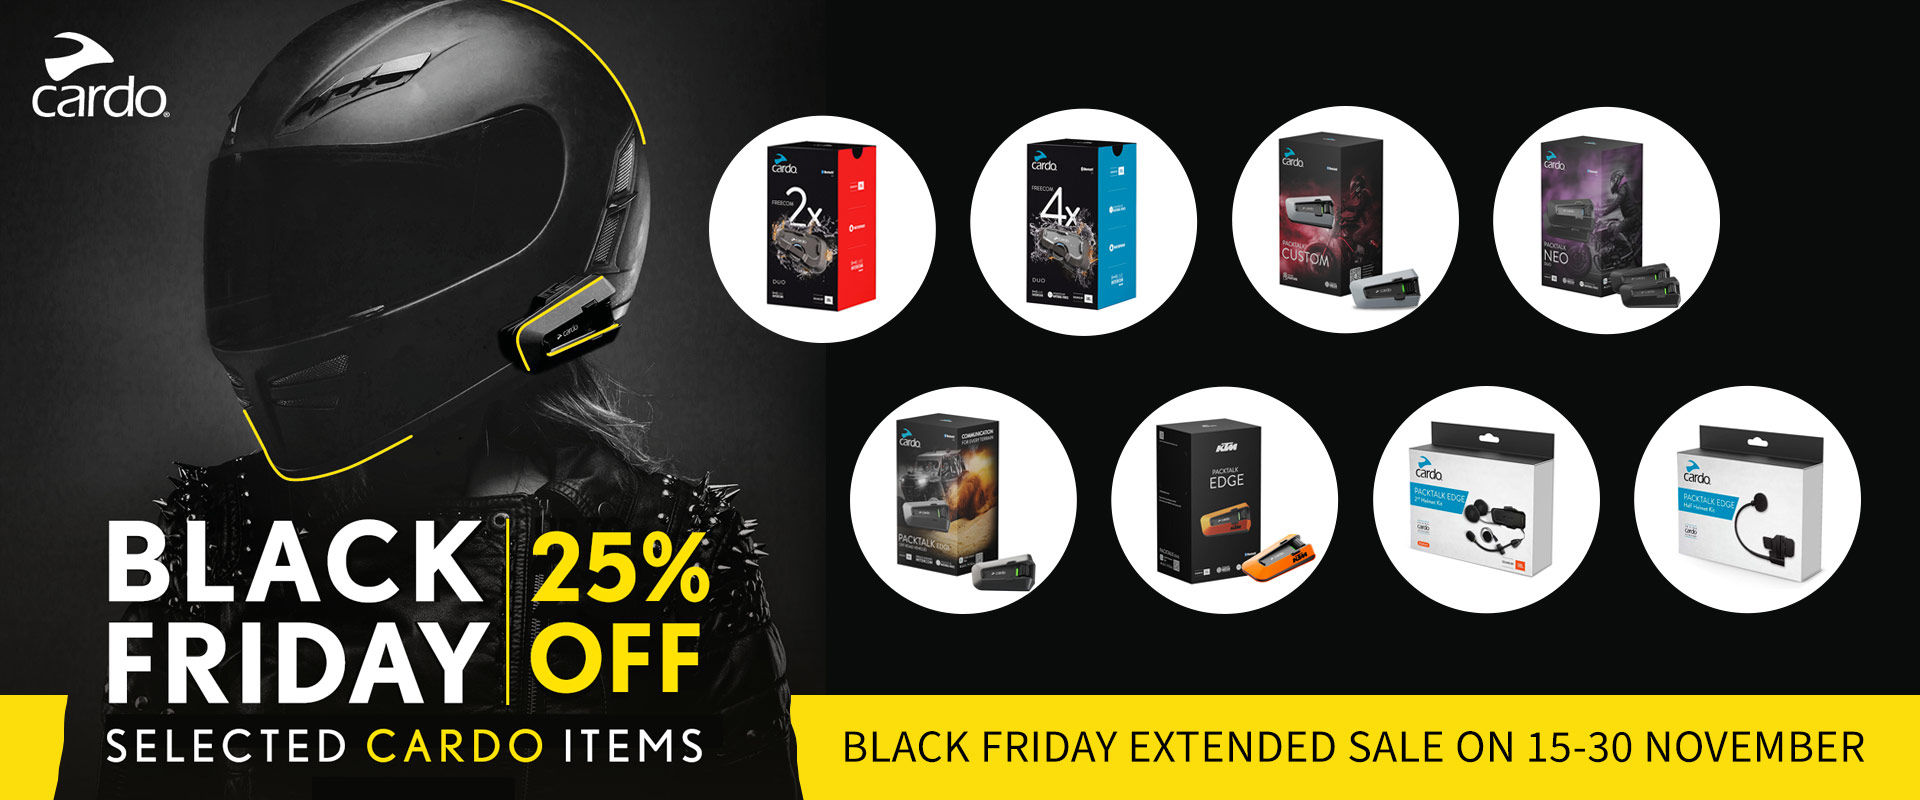 Black Friday: 25% Off Selected Cardo Items